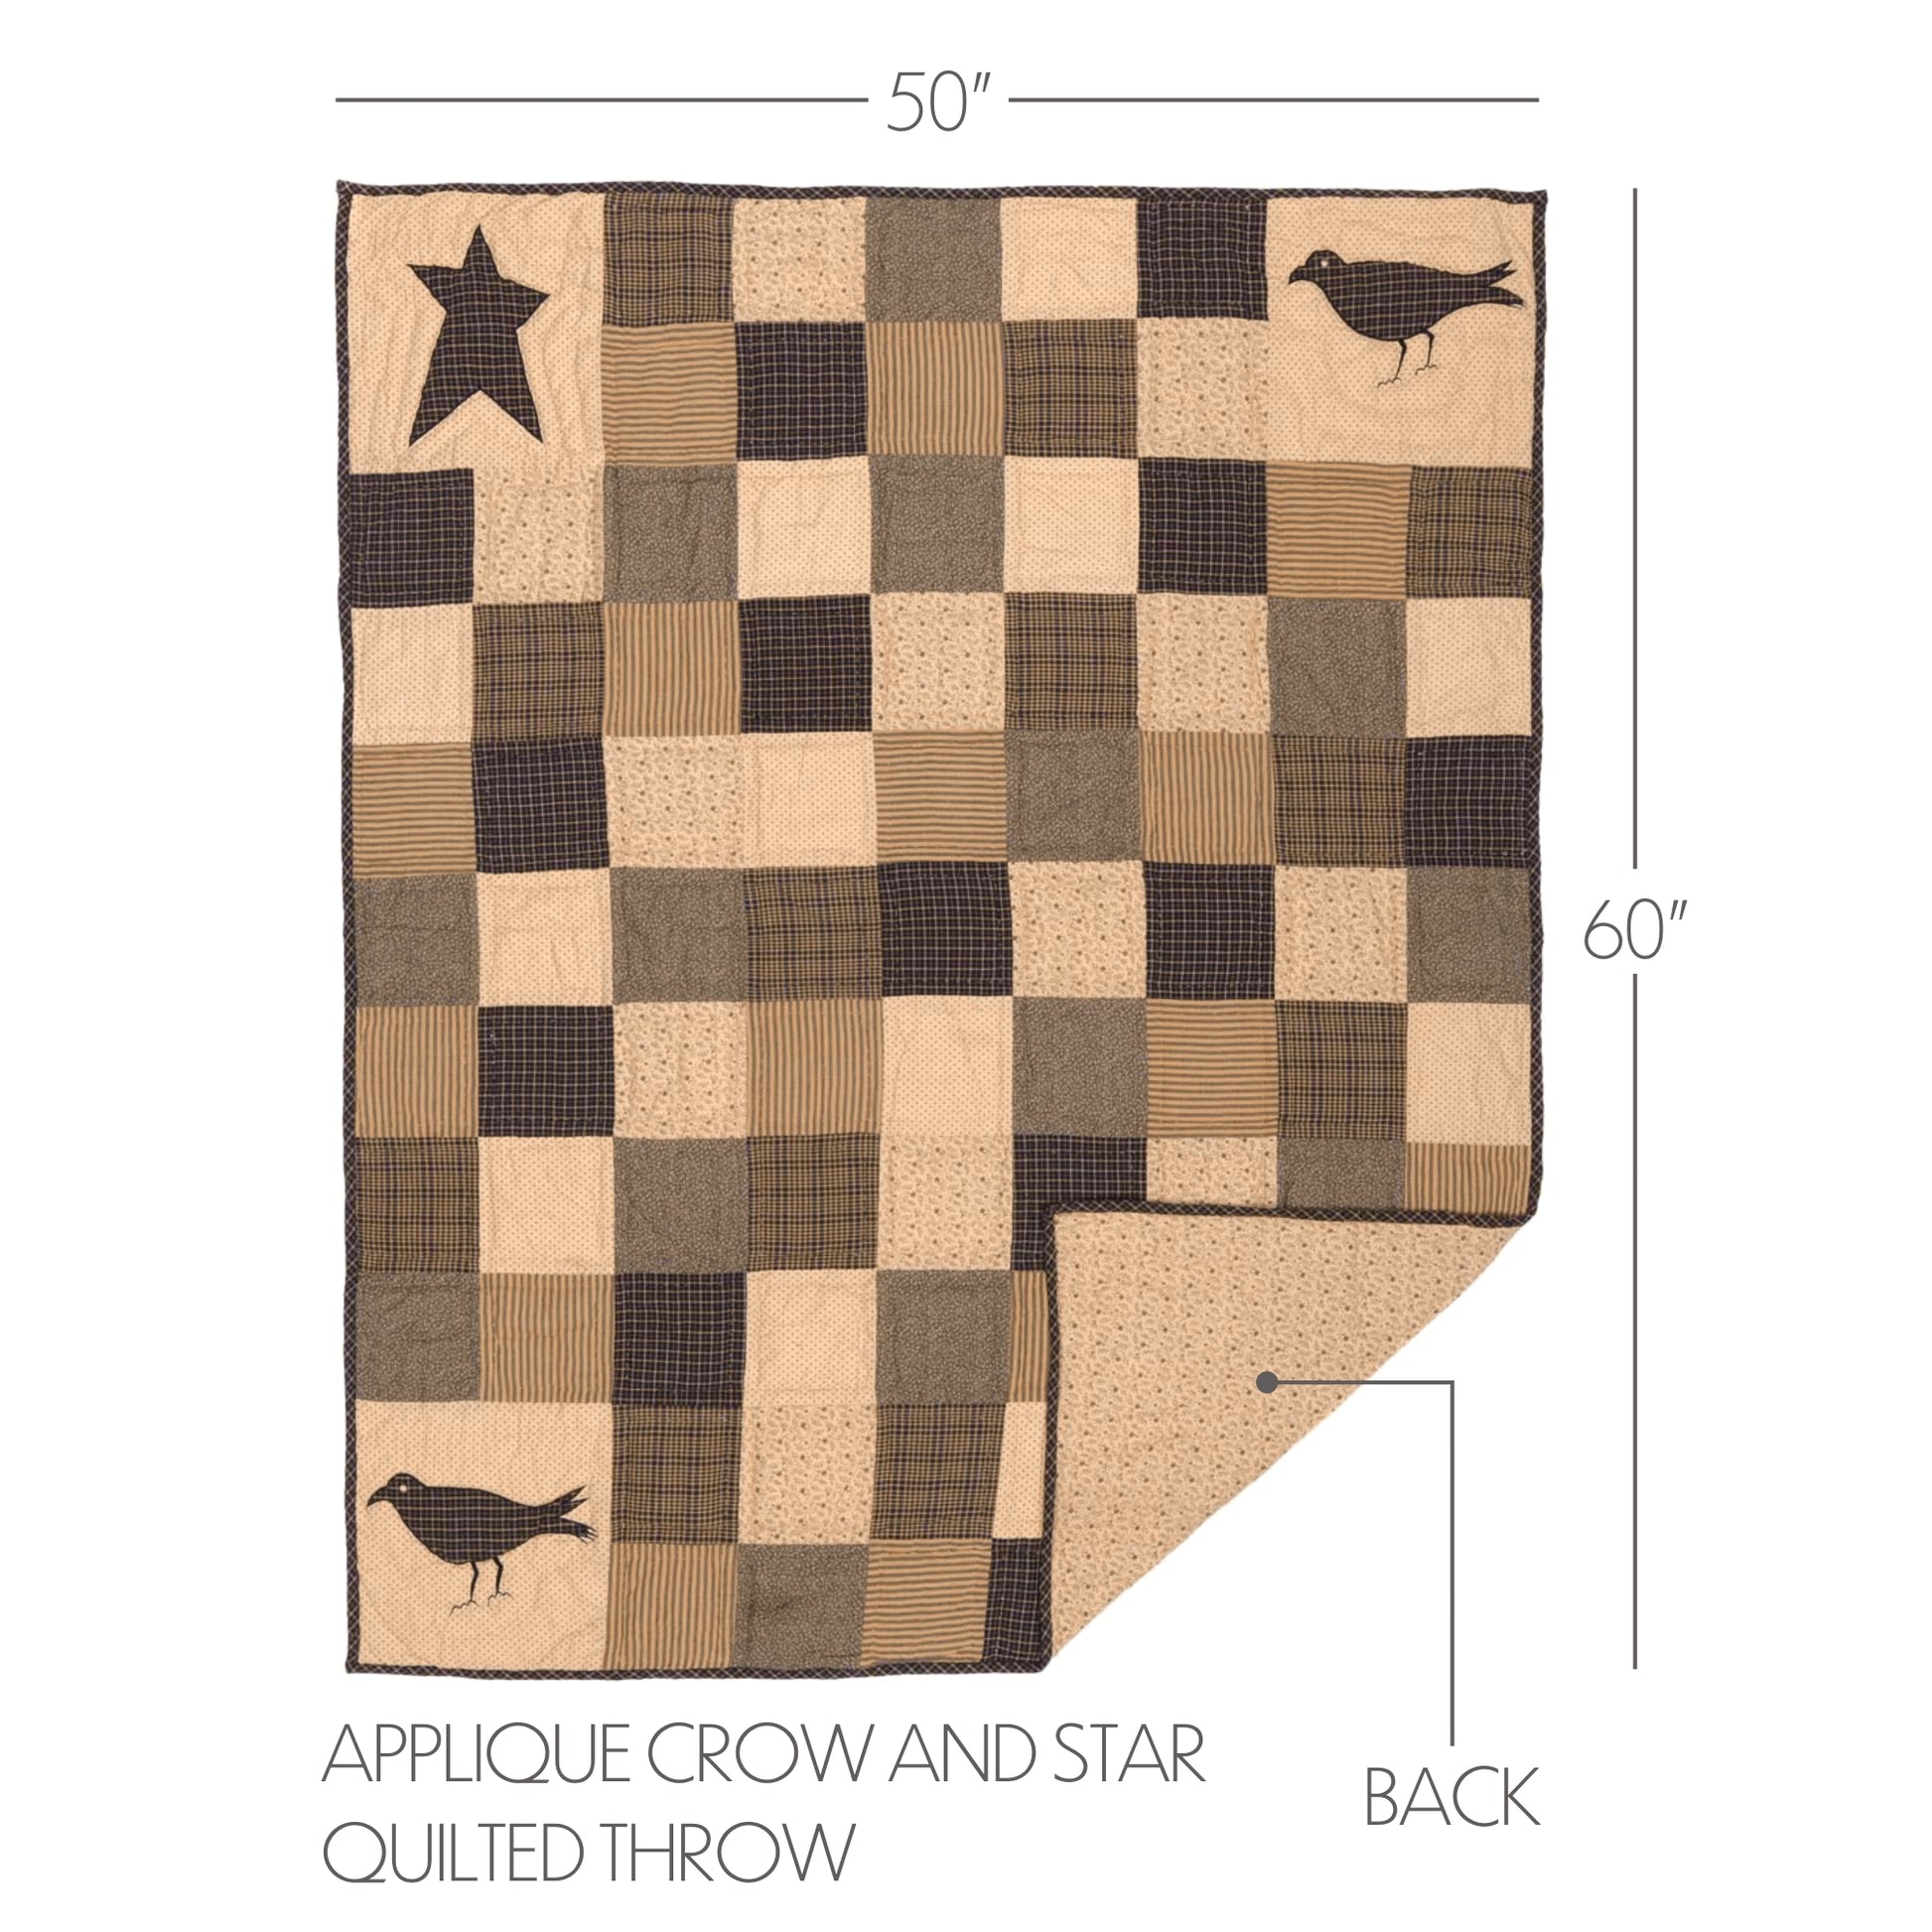 7197-Kettle-Grove-Applique-Crow-and-Star-Quilted-Throw-60x50-image-1